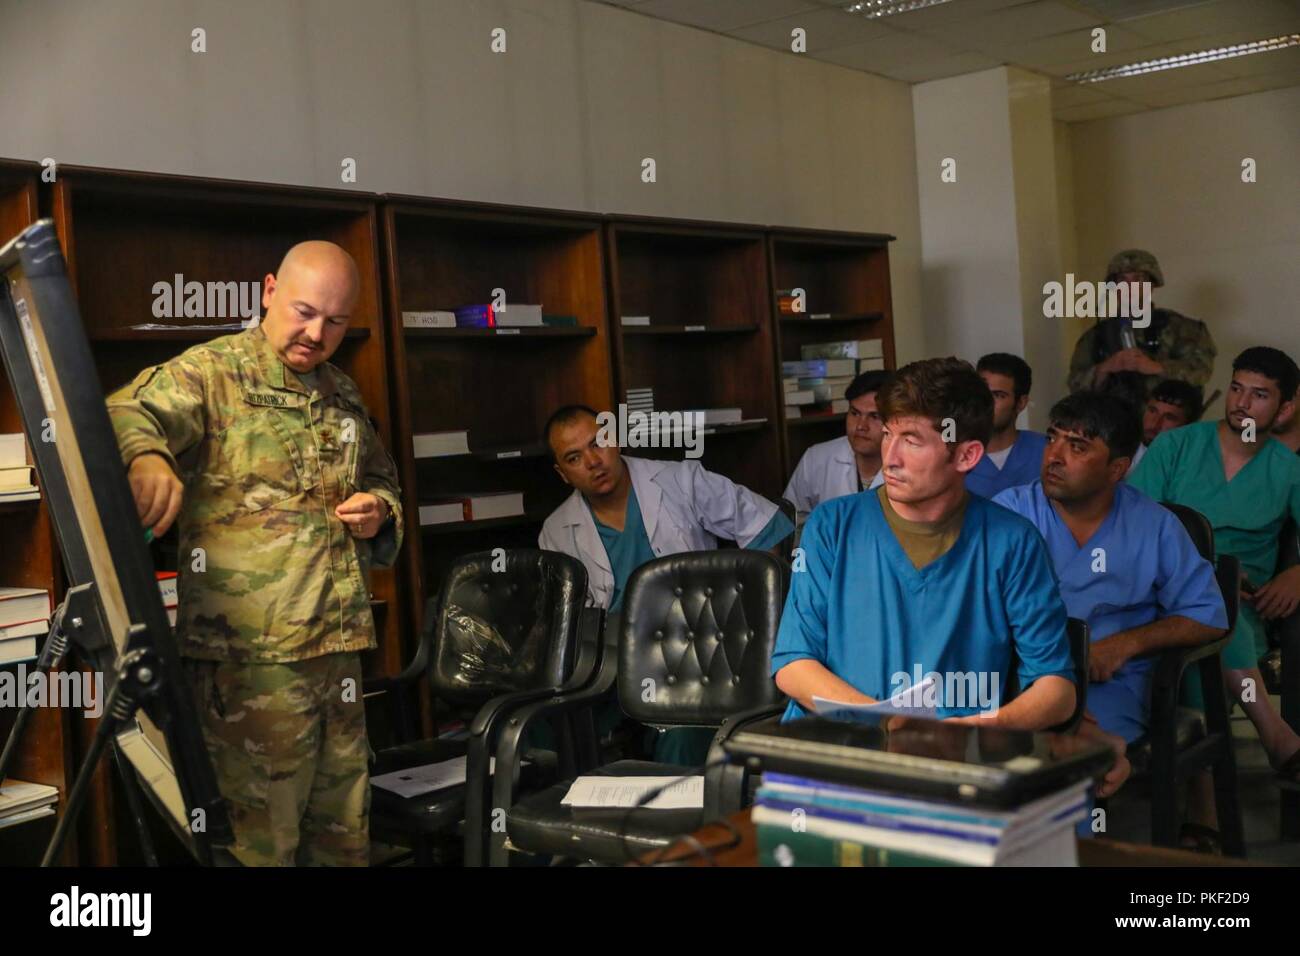 KANDAHAR PROVINCE, Afghanistan (Aug. 5, 2018) -- U.S. Navy Lt. Cdr. Travis J. Fitzpatrick, senior nurse for Kandahar Airfield NATO Role III Multinational Medical Unit, goes over human anatomy, August 5, 2018, to begin his class on how to clear an airway on a patient during a medical advisory visit at Kandahar Regional Military Hospital, Camp Hero in Kandahar, Afghanistan. Staff members from the Role III conduct routine visits to KRMH to train and advise Afghan medical staff. Stock Photo